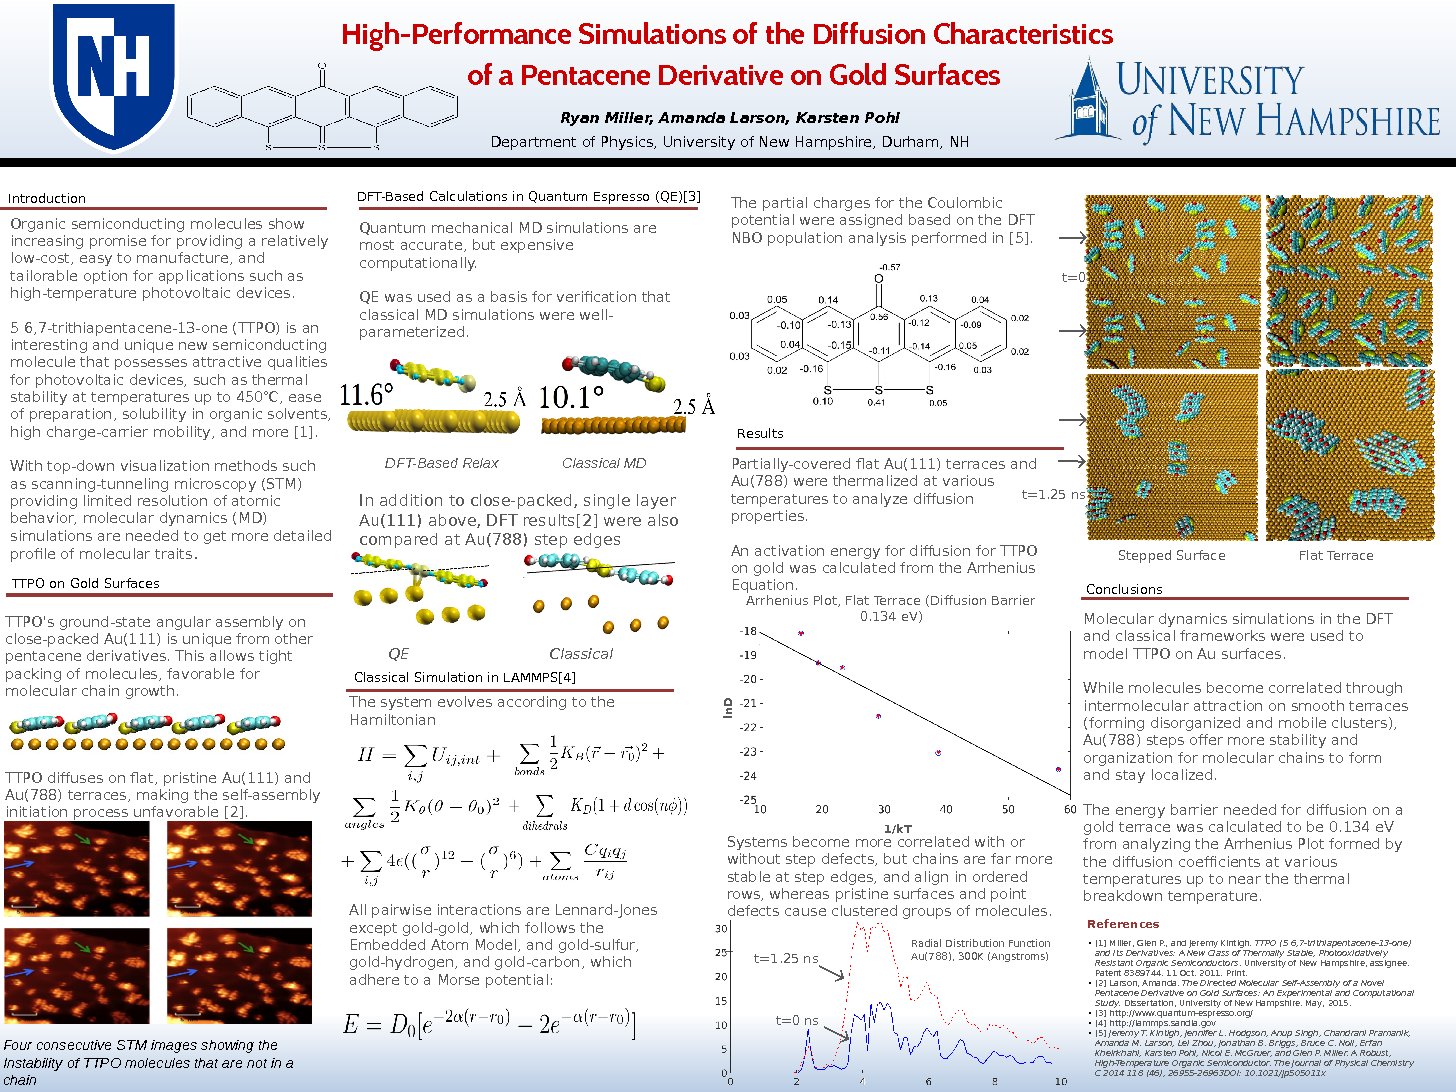 High-Performance Simulations Of The Diffusion Characteristics Of A Pentacene Derivative On Gold Surfaces by rmiller1291